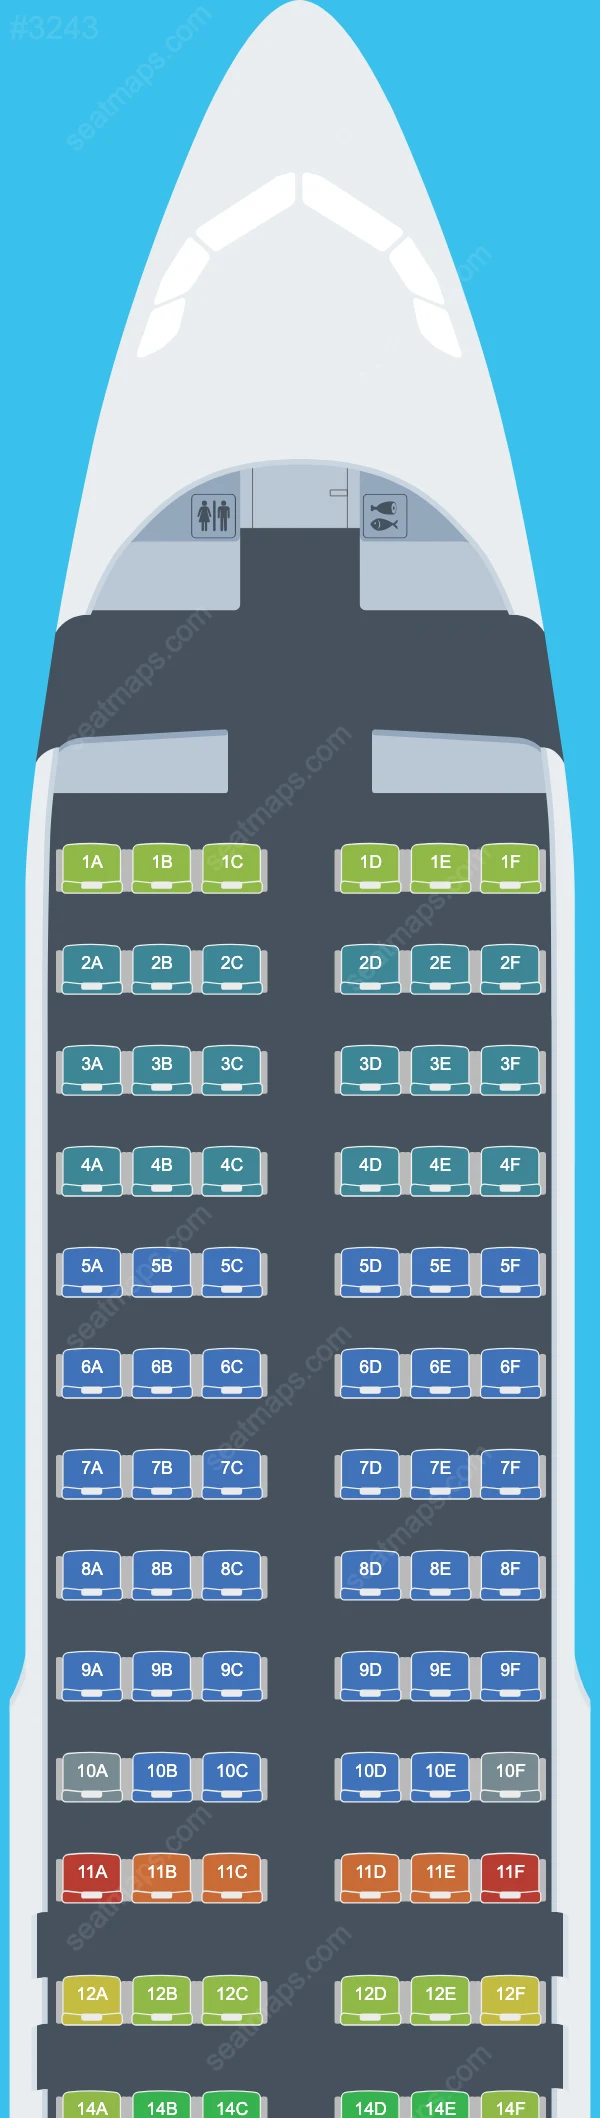 Vueling Airbus A320 Seat Maps A320-200 V.1